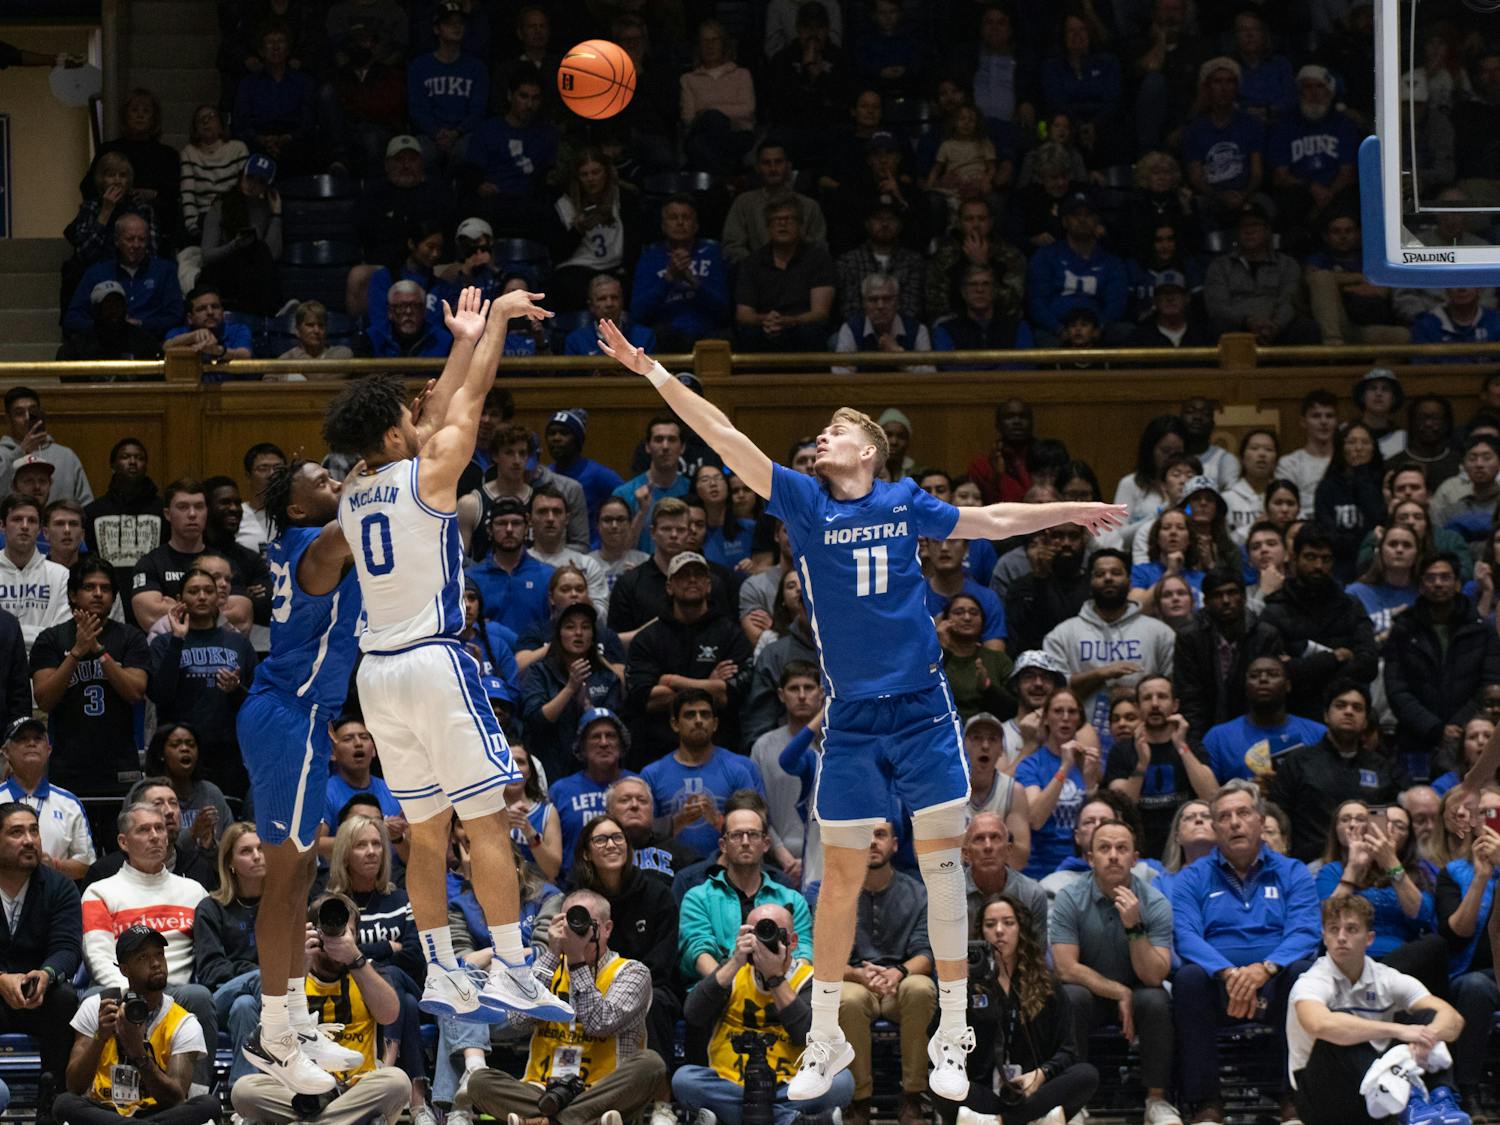 Jared McCain shoots over a defender during Duke's Dec. 12 win against Hofstra.